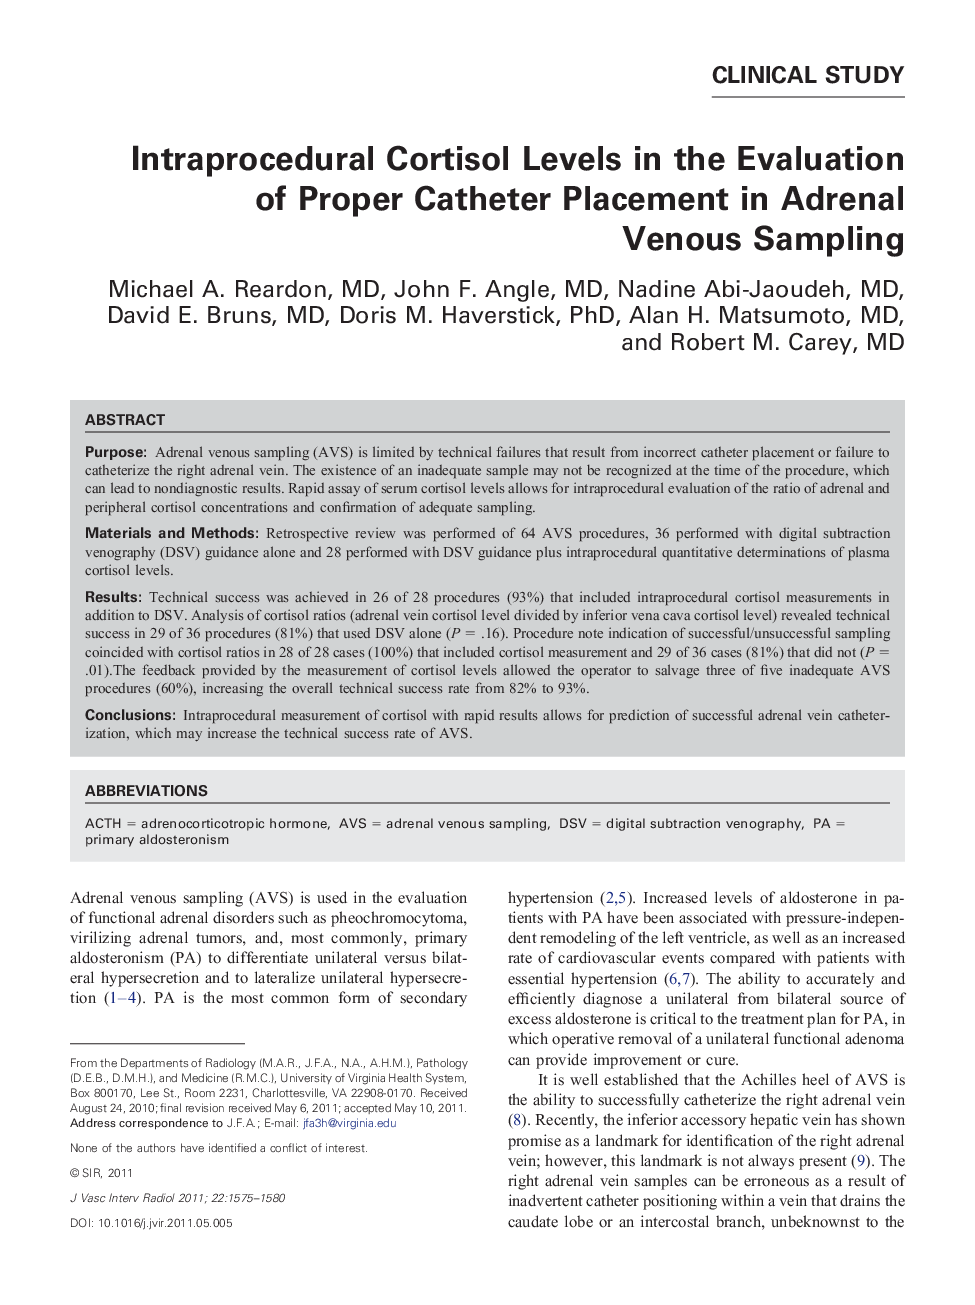 Intraprocedural Cortisol Levels in the Evaluation of Proper Catheter Placement in Adrenal Venous Sampling